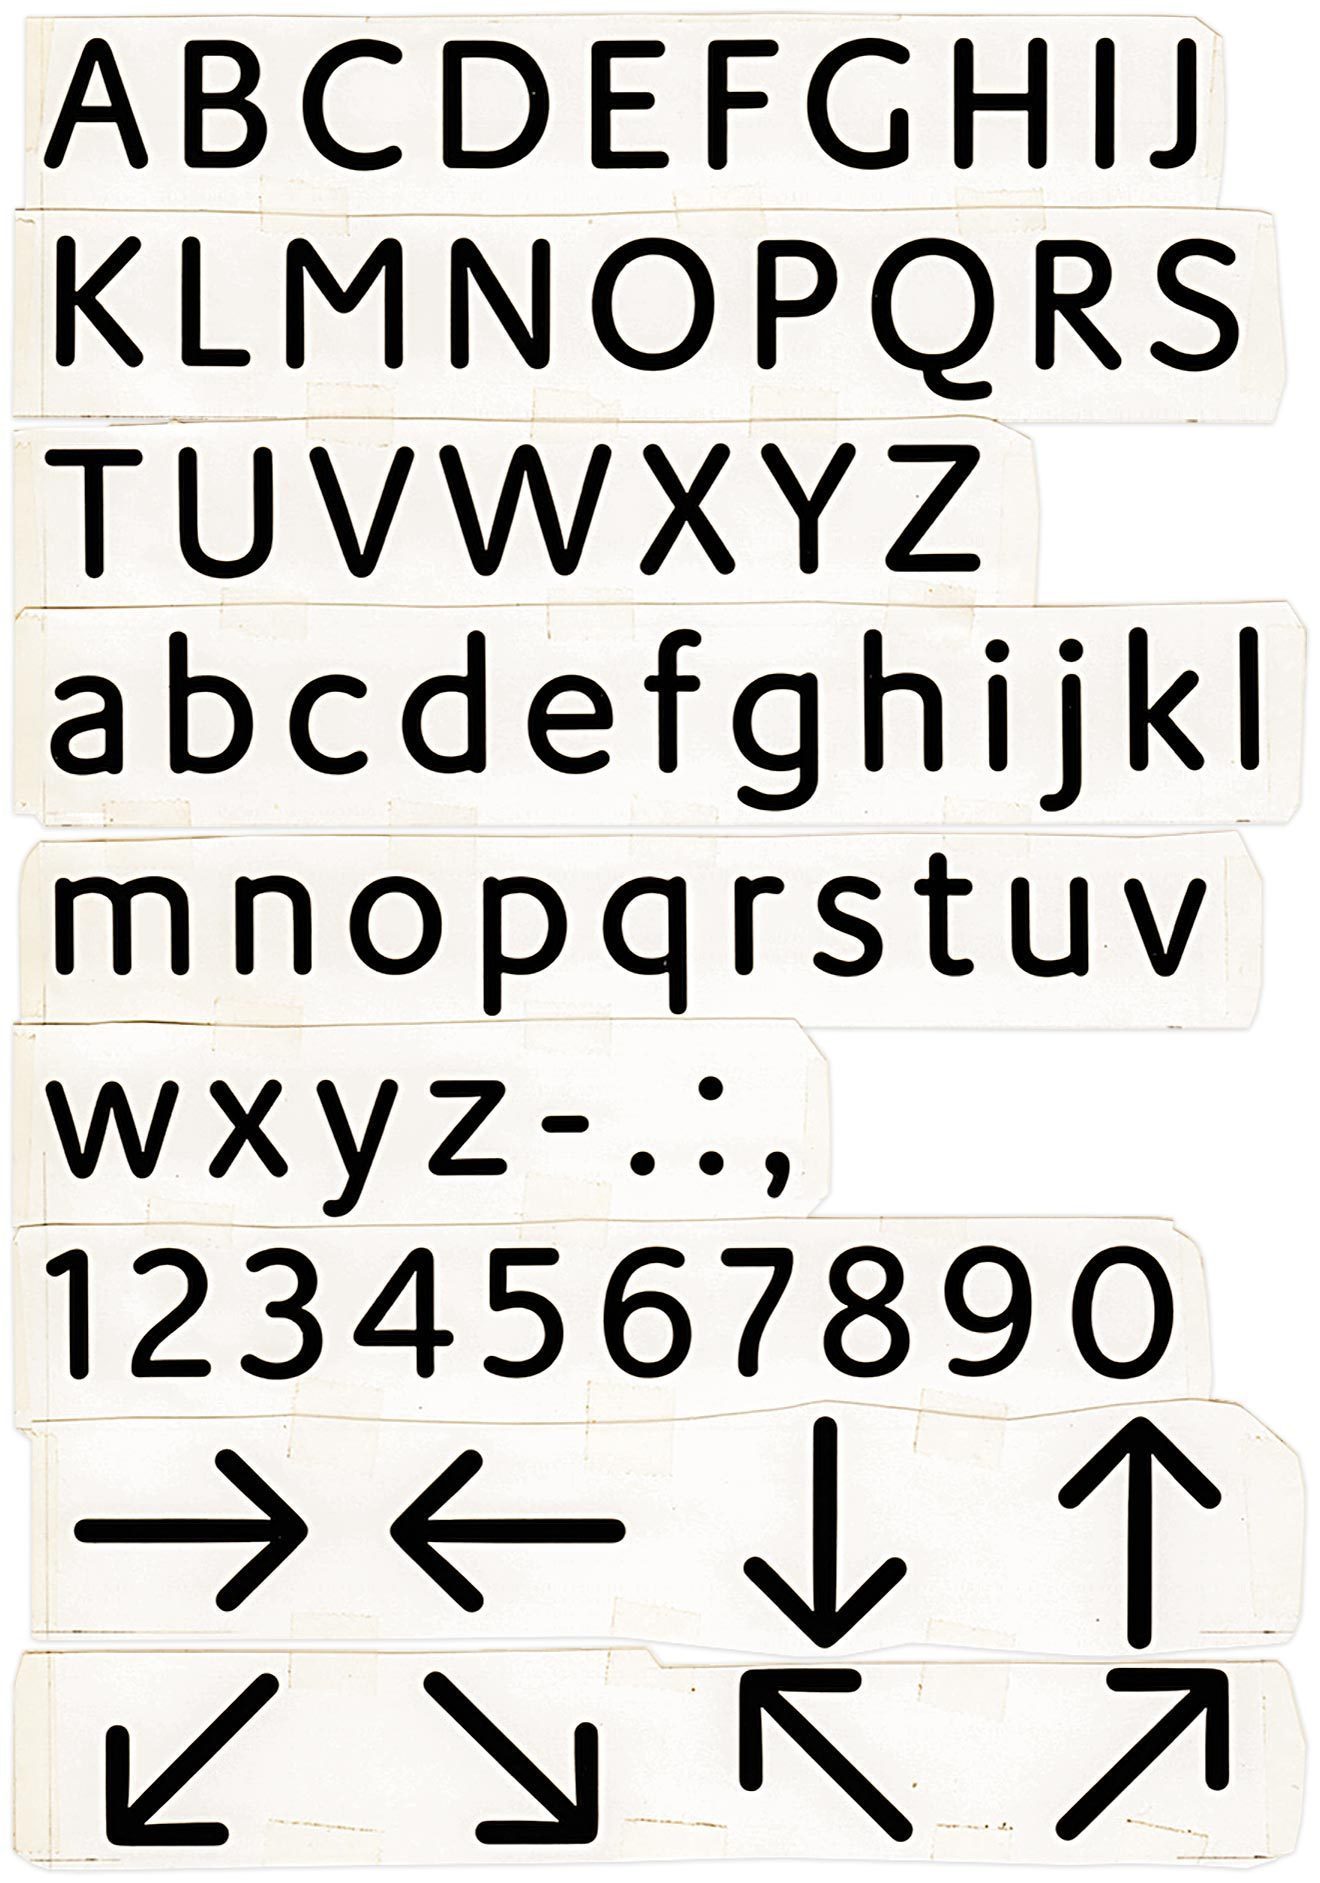 In 1974 Gerard Unger finished his typeface M.O.L., to be applied on the back-lit signs (top) for the new Amsterdam metro orientation system, developed by Pieter Brattinger and his team. A mole (in Dutch mol) was the metro’s new mascot, thus giving the type its name. Overall M.O.L. is equipped with wide-open counters and round letterforms to improve legibility and includes arrows for signage (bottom). (With kind permission from the collection of Gerard Unger.)